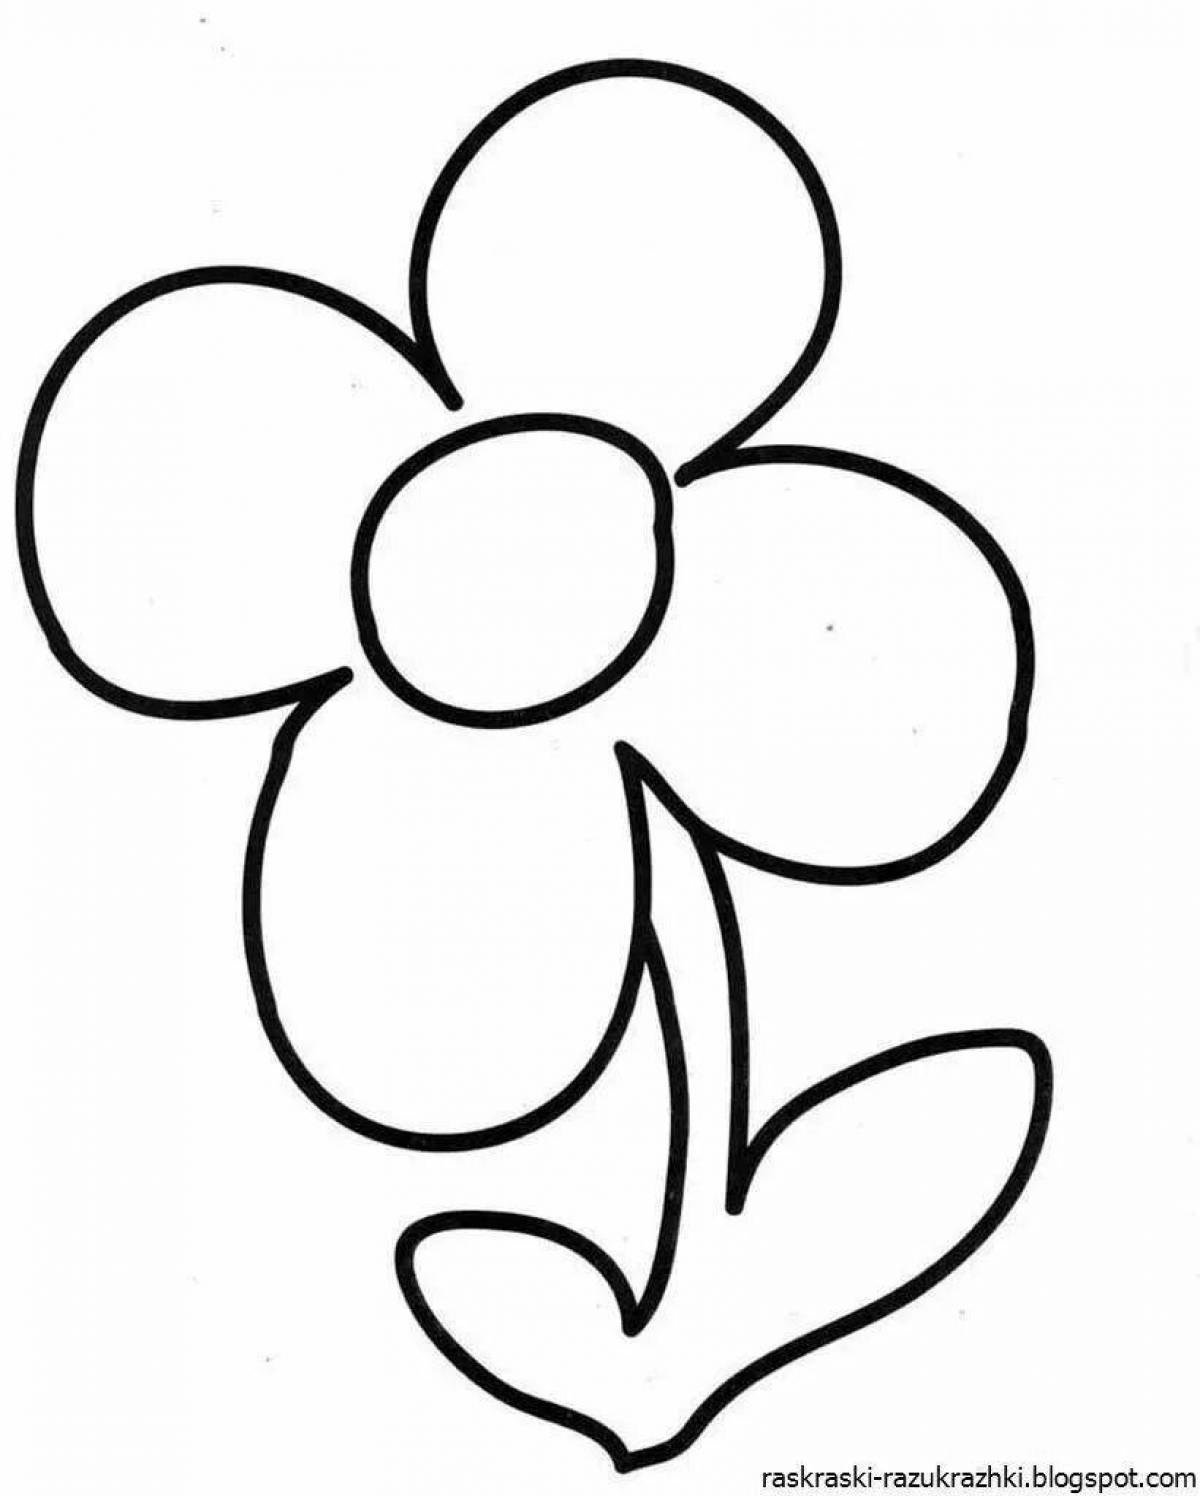 Adorable flowers coloring book for children 3-4 years old